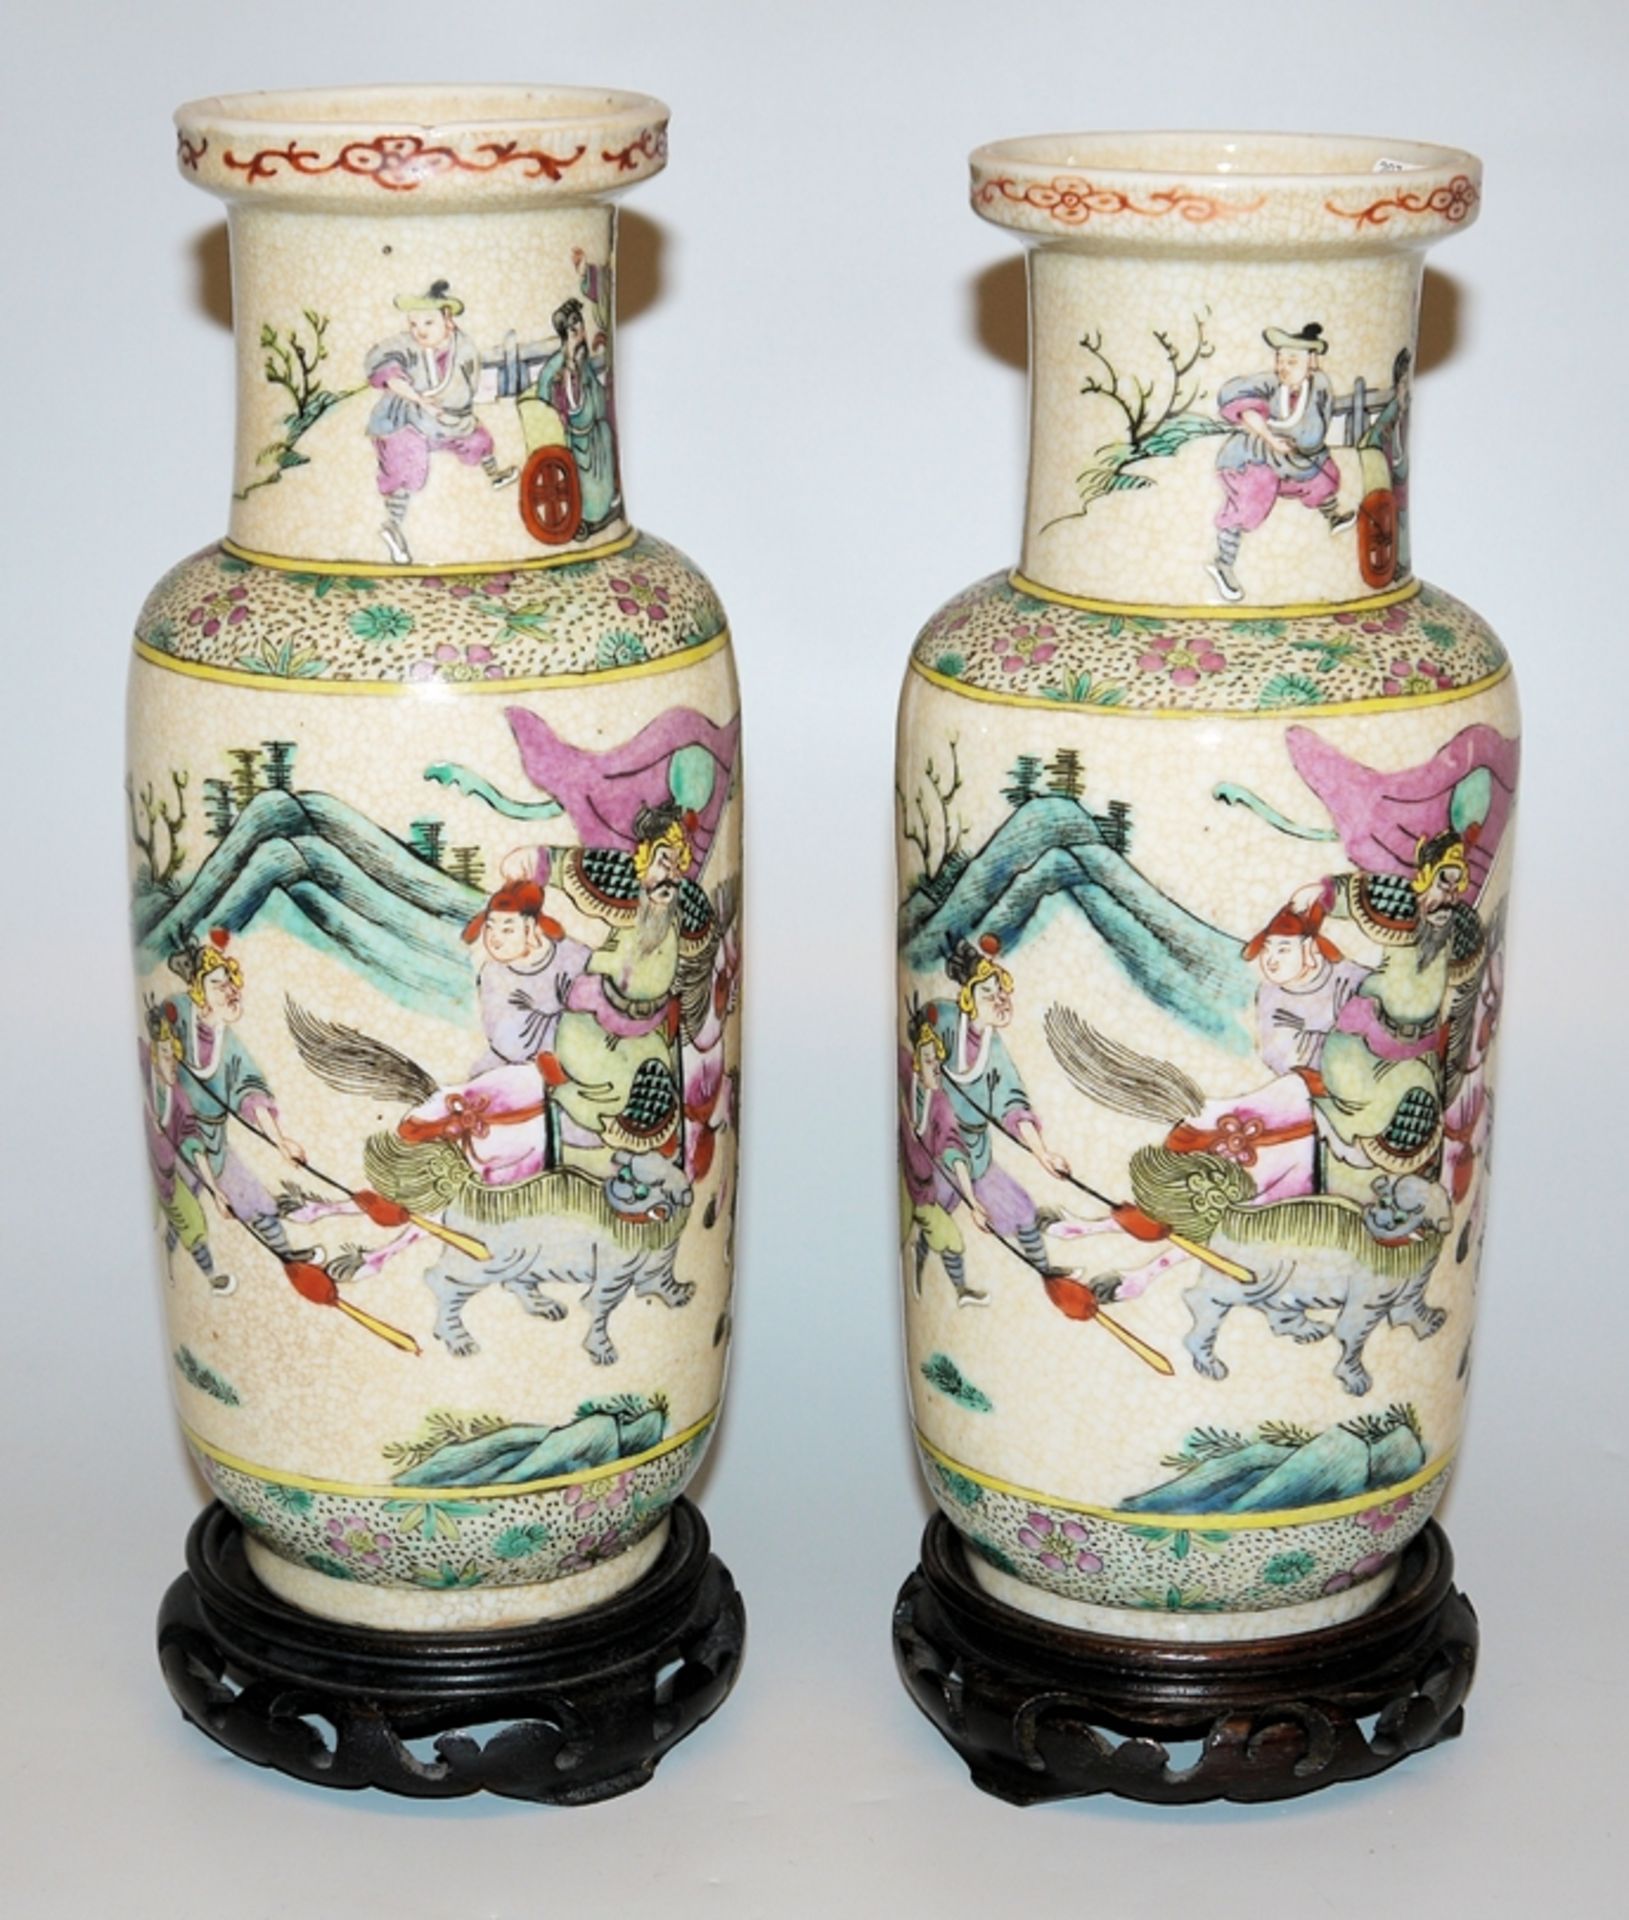 Pair of rouleau vases with battle scenes, Republic period, China, early 20th century - Image 2 of 4